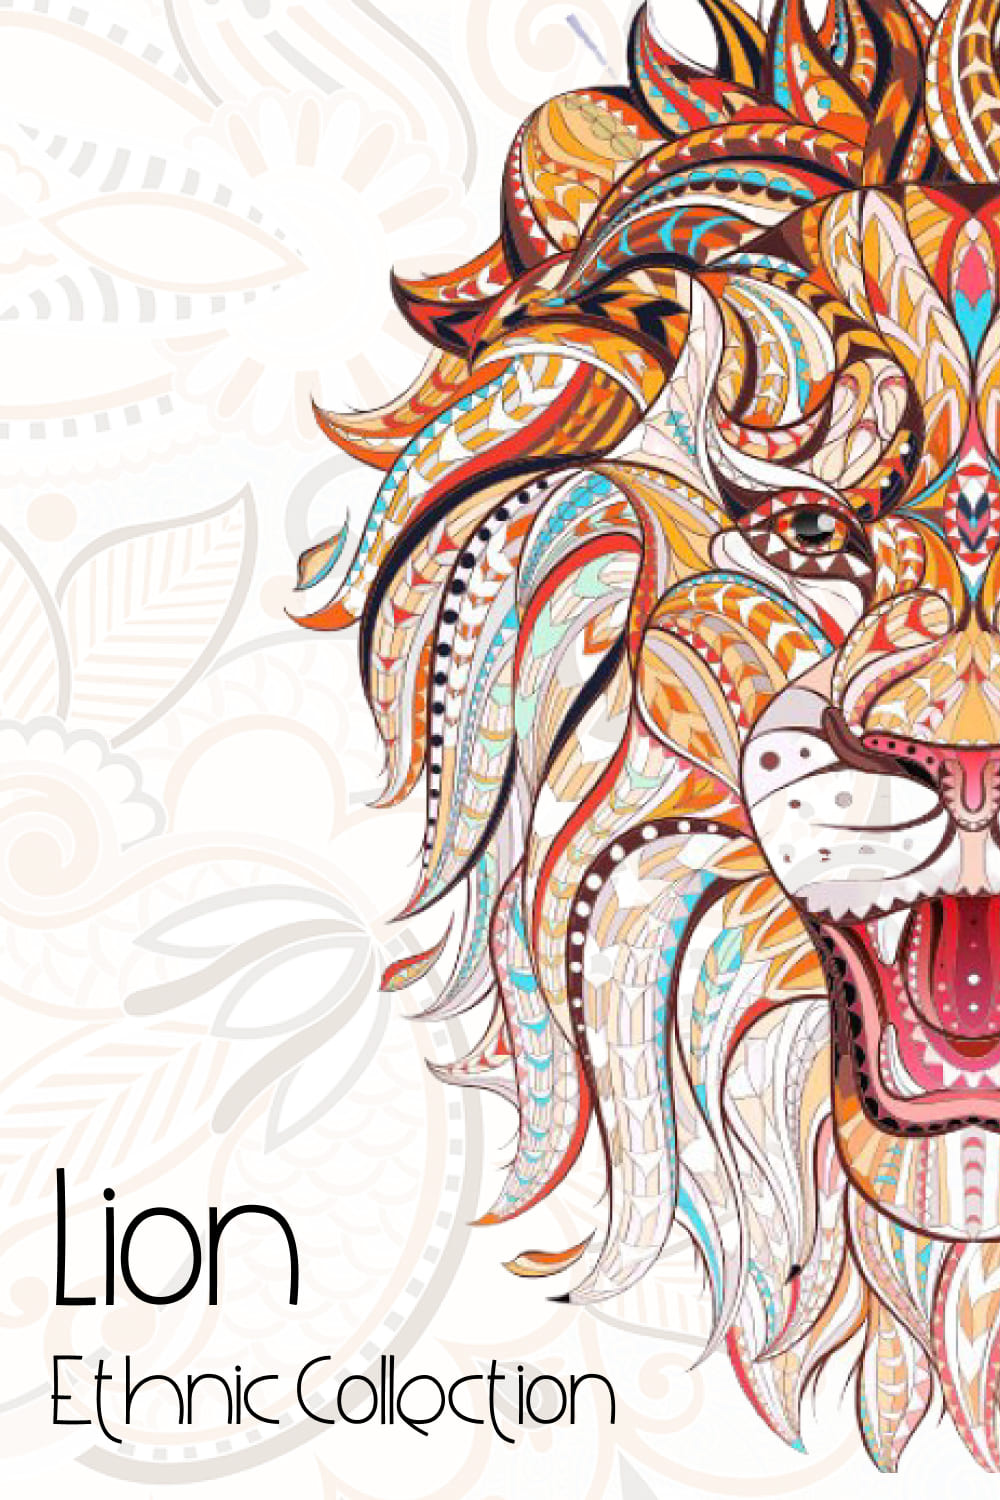 Ethnic Collection: Lion.